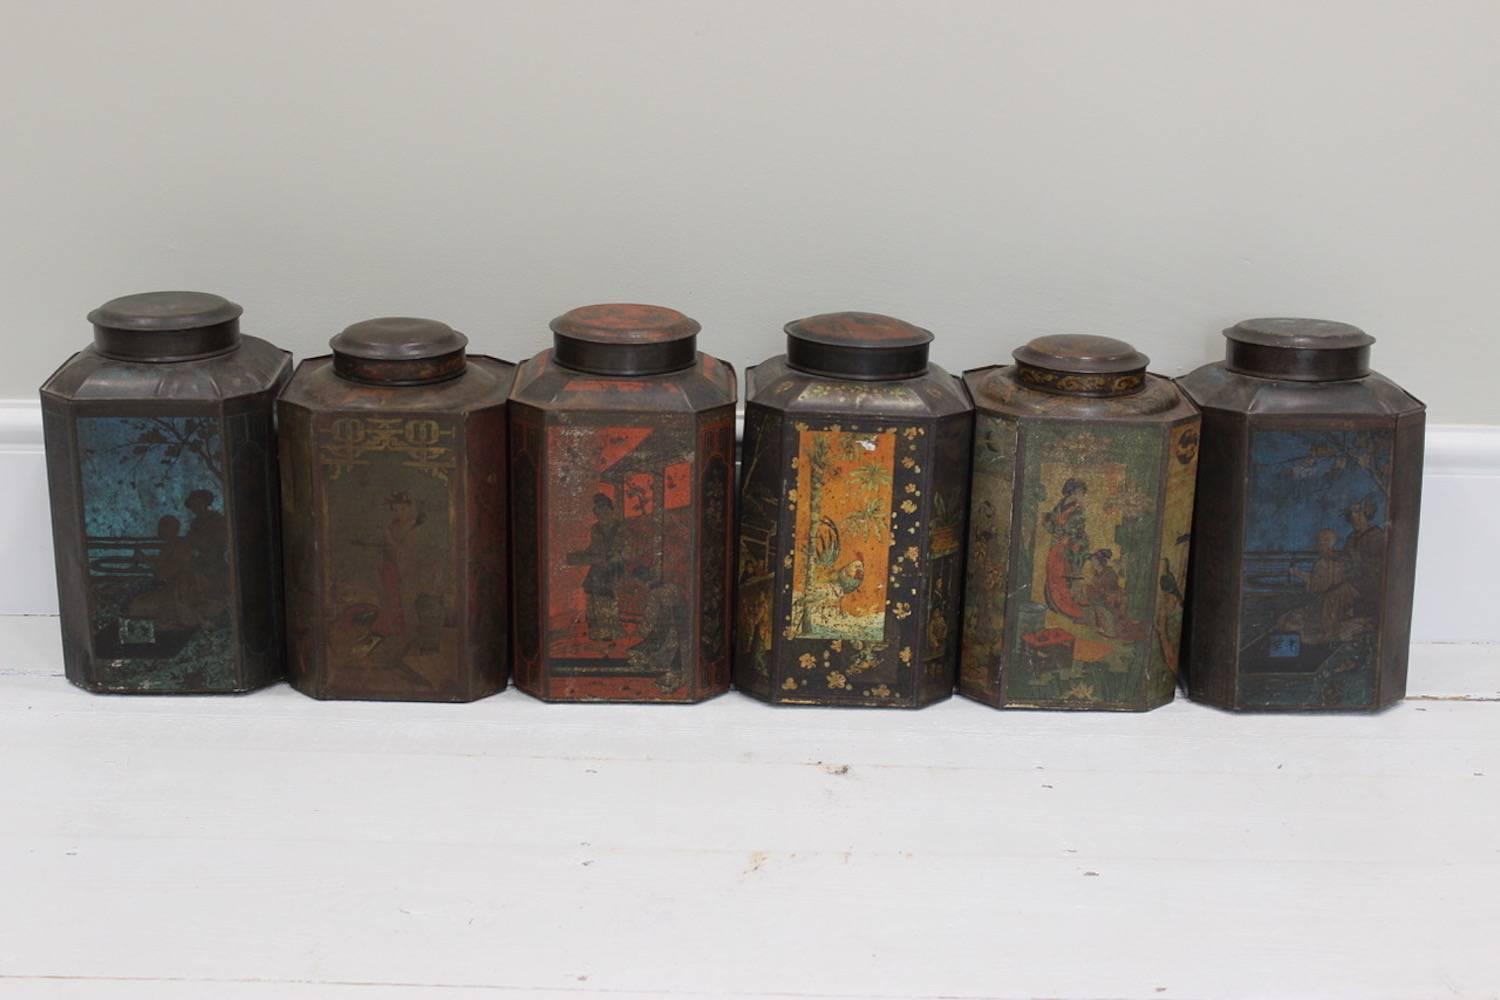 An interesting and original set of seven tole tea canisters with huge decorative potential, with maker's marks: Wed J Beakers & Zoon, Dordrecht. Dutch, early 20th century.